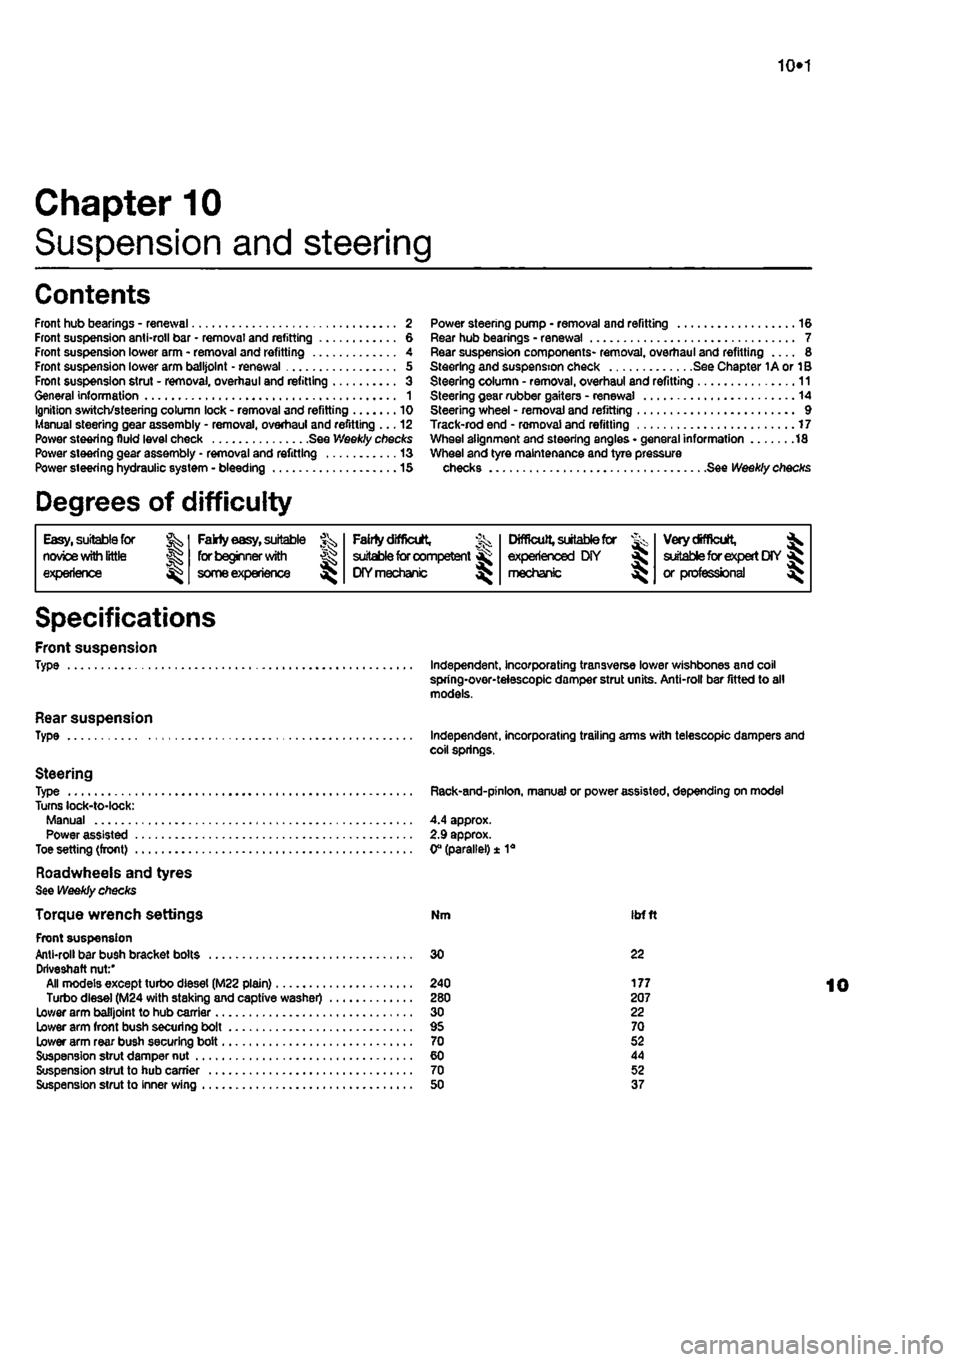 FIAT PUNTO 1995 176 / 1.G Owners Guide 
10*1 
Chapter 10 
Suspension and steering 
Contents 
Front hub bearings - renewal 2 Front suspension anti-roll bar • removal and refitting 6 Front suspension lower arm - removal and refitting 4 Fro